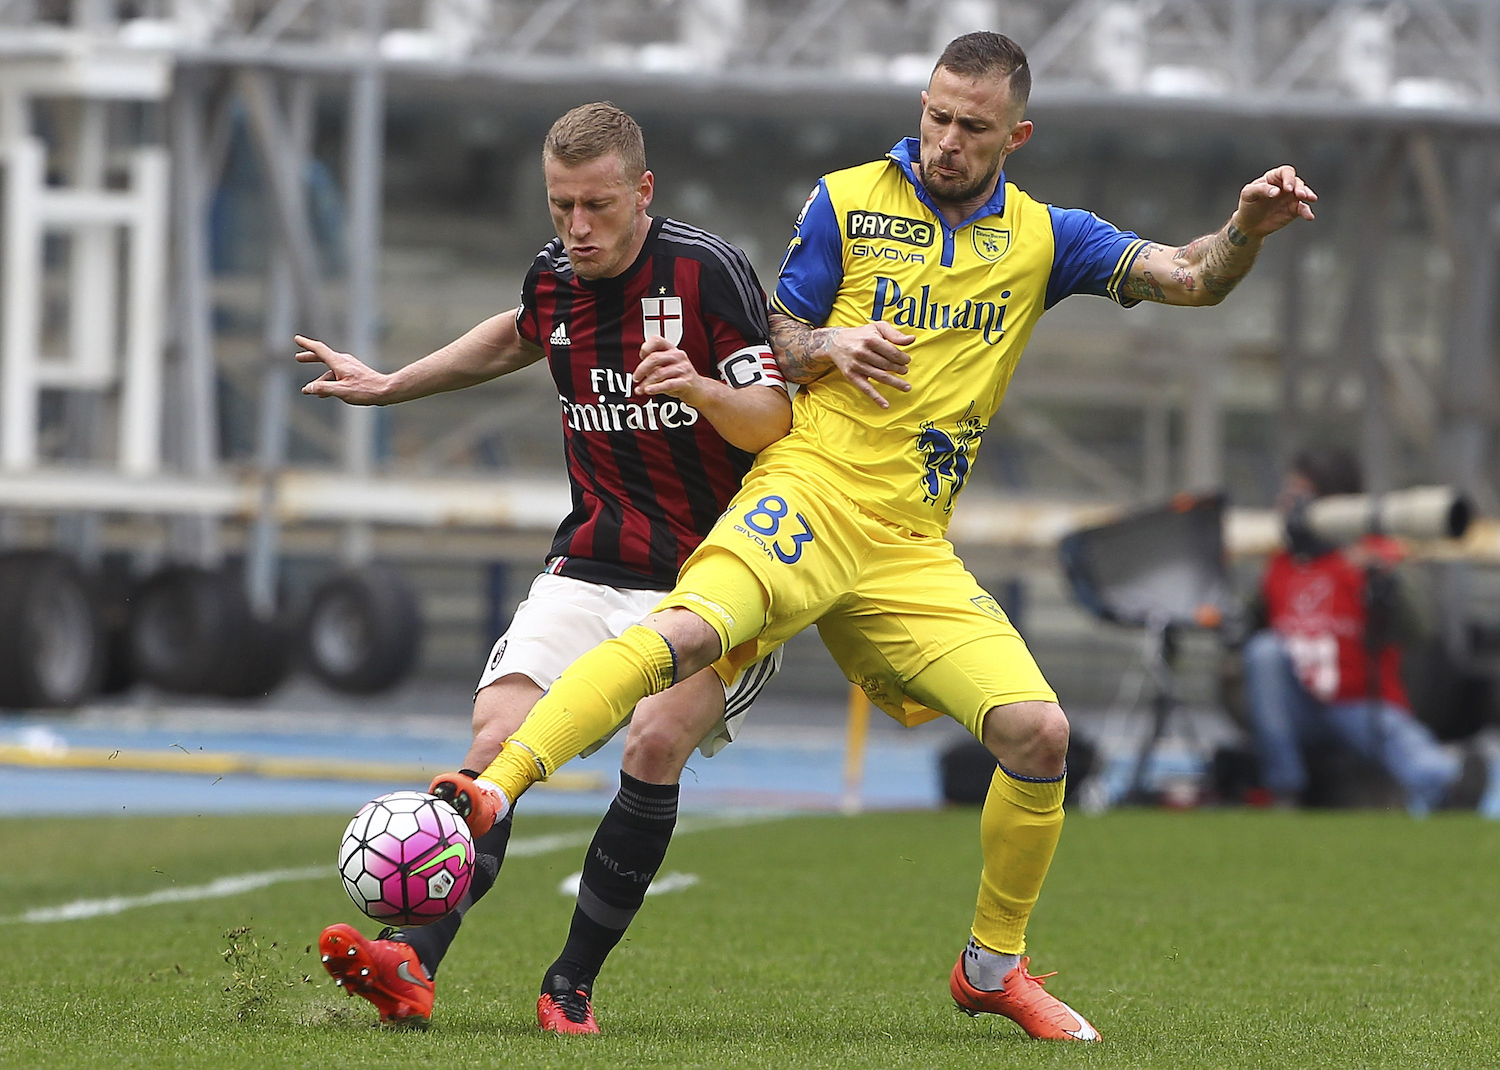 Abate in action against chievo. | Marco Luzzani/Getty Images